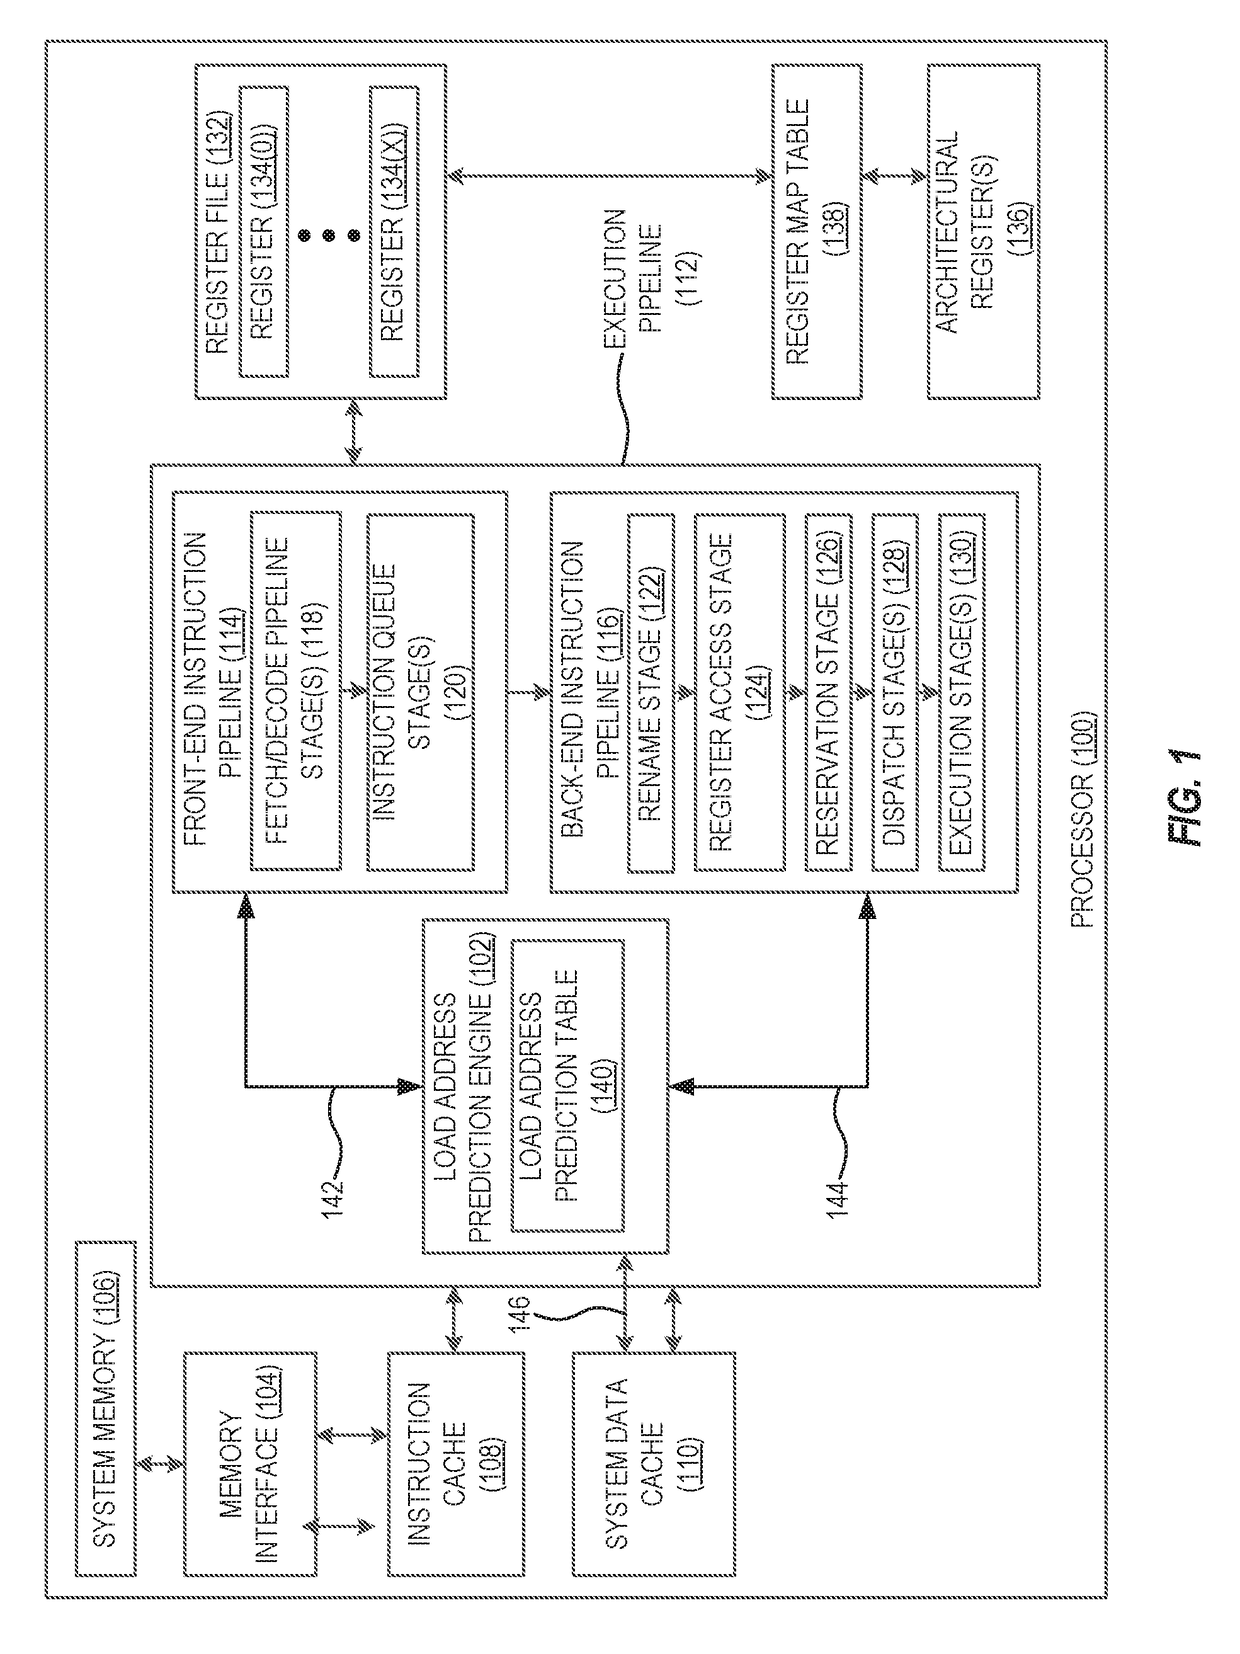 Providing load address predictions using address prediction tables based on load path history in processor-based systems